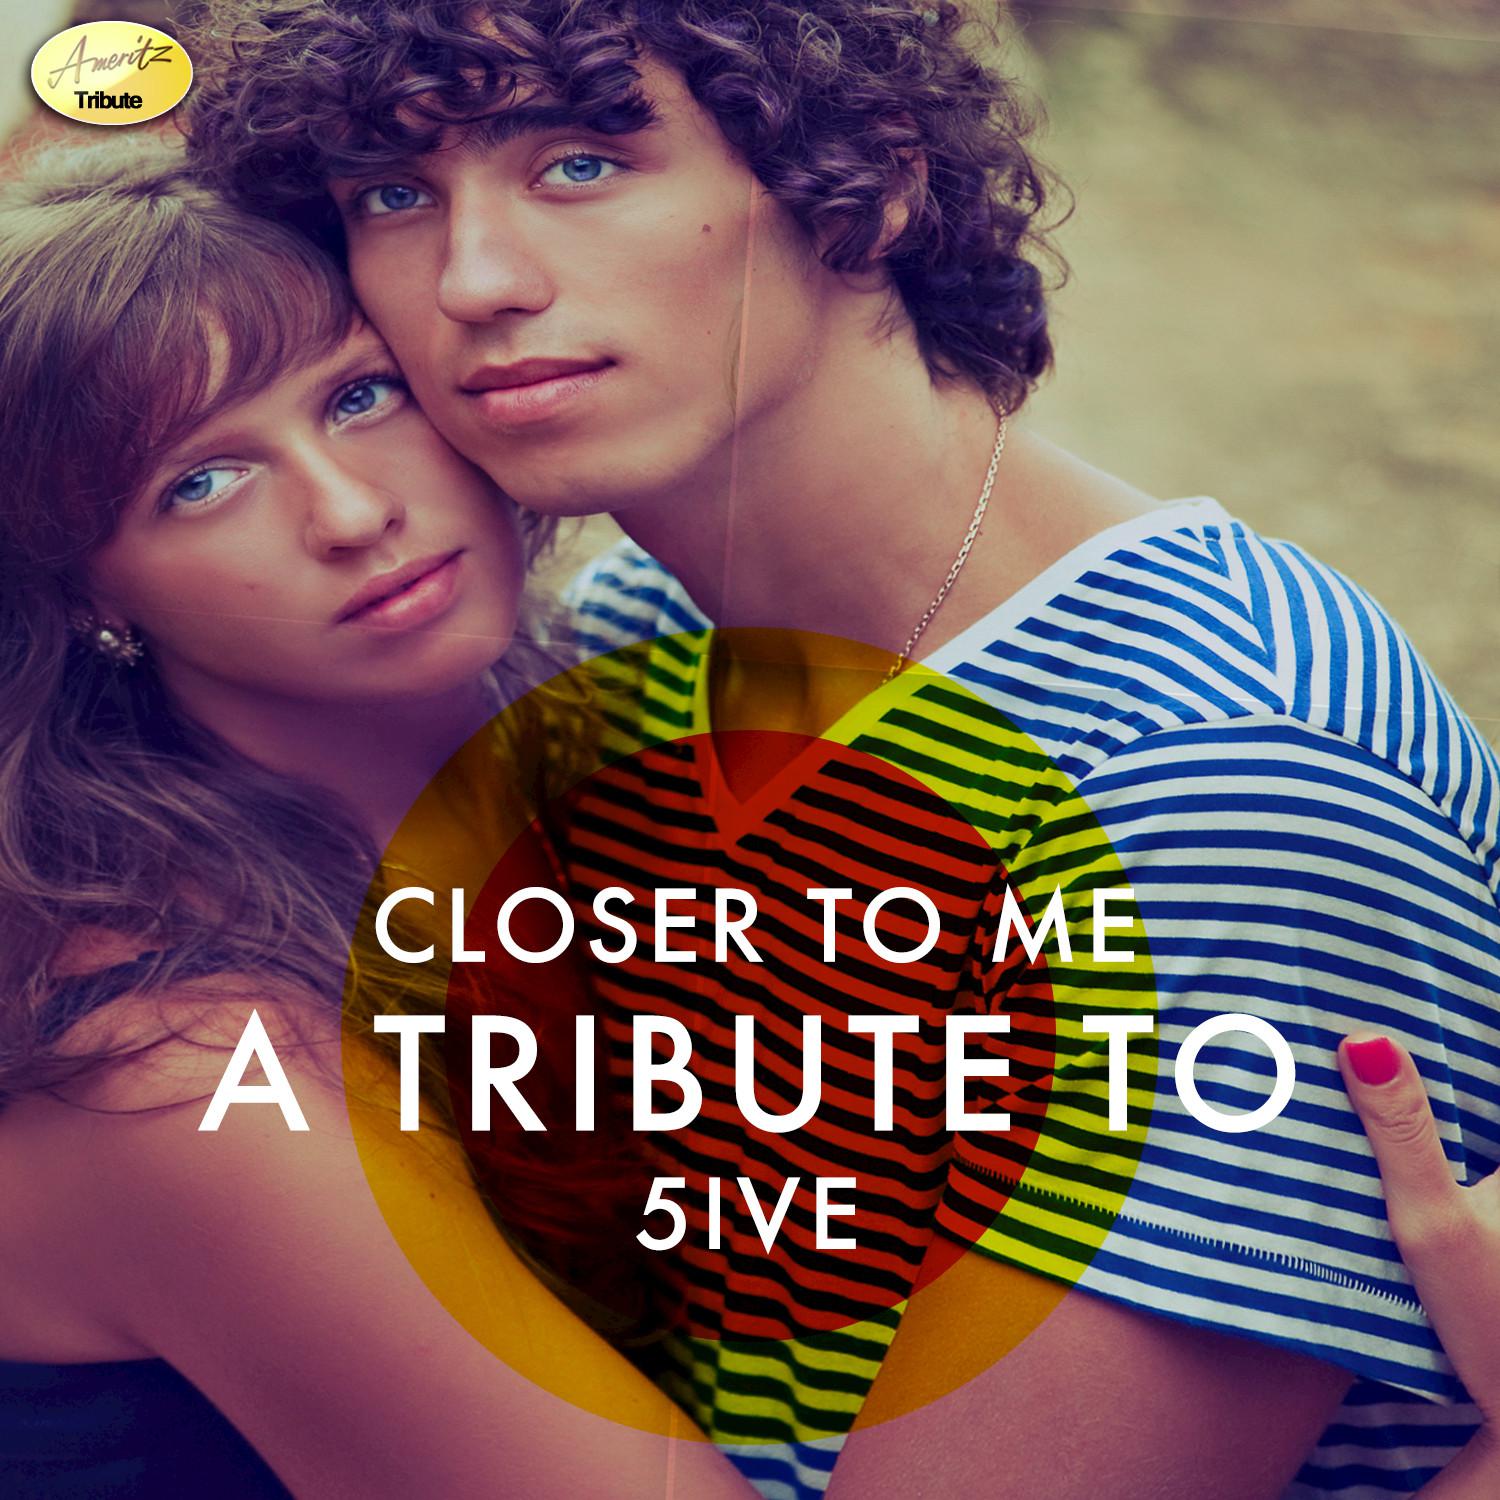 Closer to Me - A Tribute to 5ive